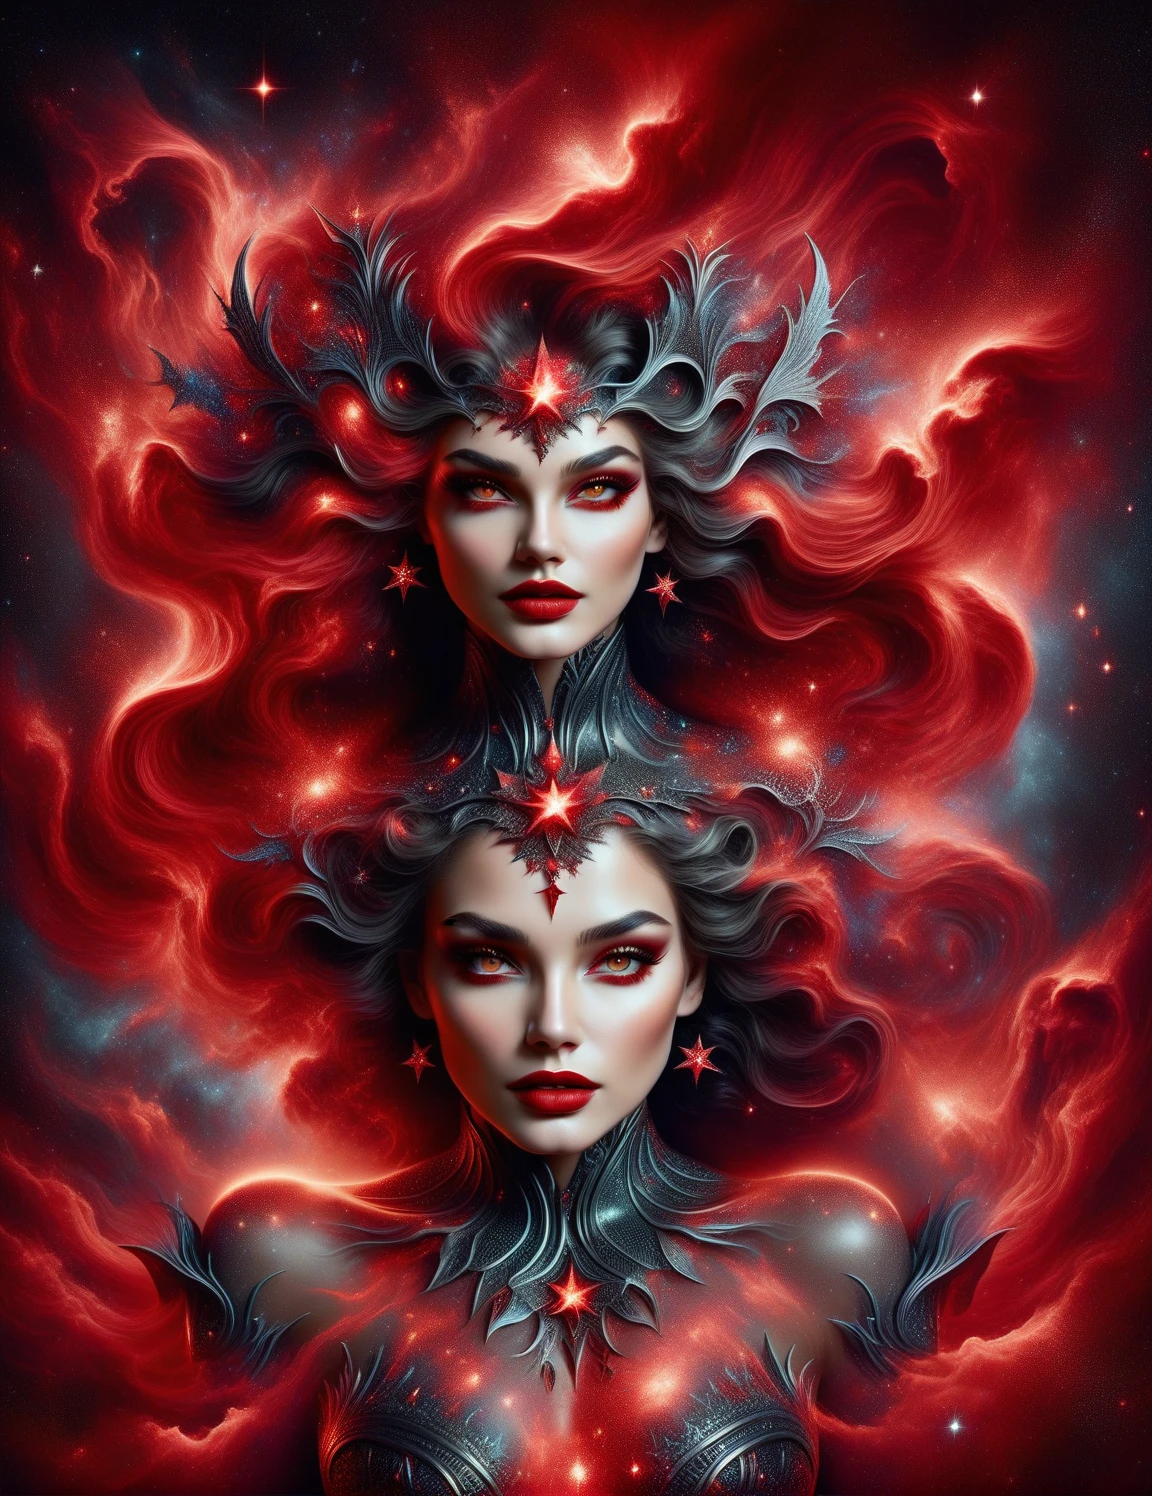 ragingnebula,high quality , dress made out of black stars, close up photo of very seductive red lips,sexy,beautiful,realistic,lifelike,studio photo,highly detailed,beautiful highly detailed eyes, dreamcore, Illustrations in the style of fantasy mythology, ultra realistic illustration, complementary colors